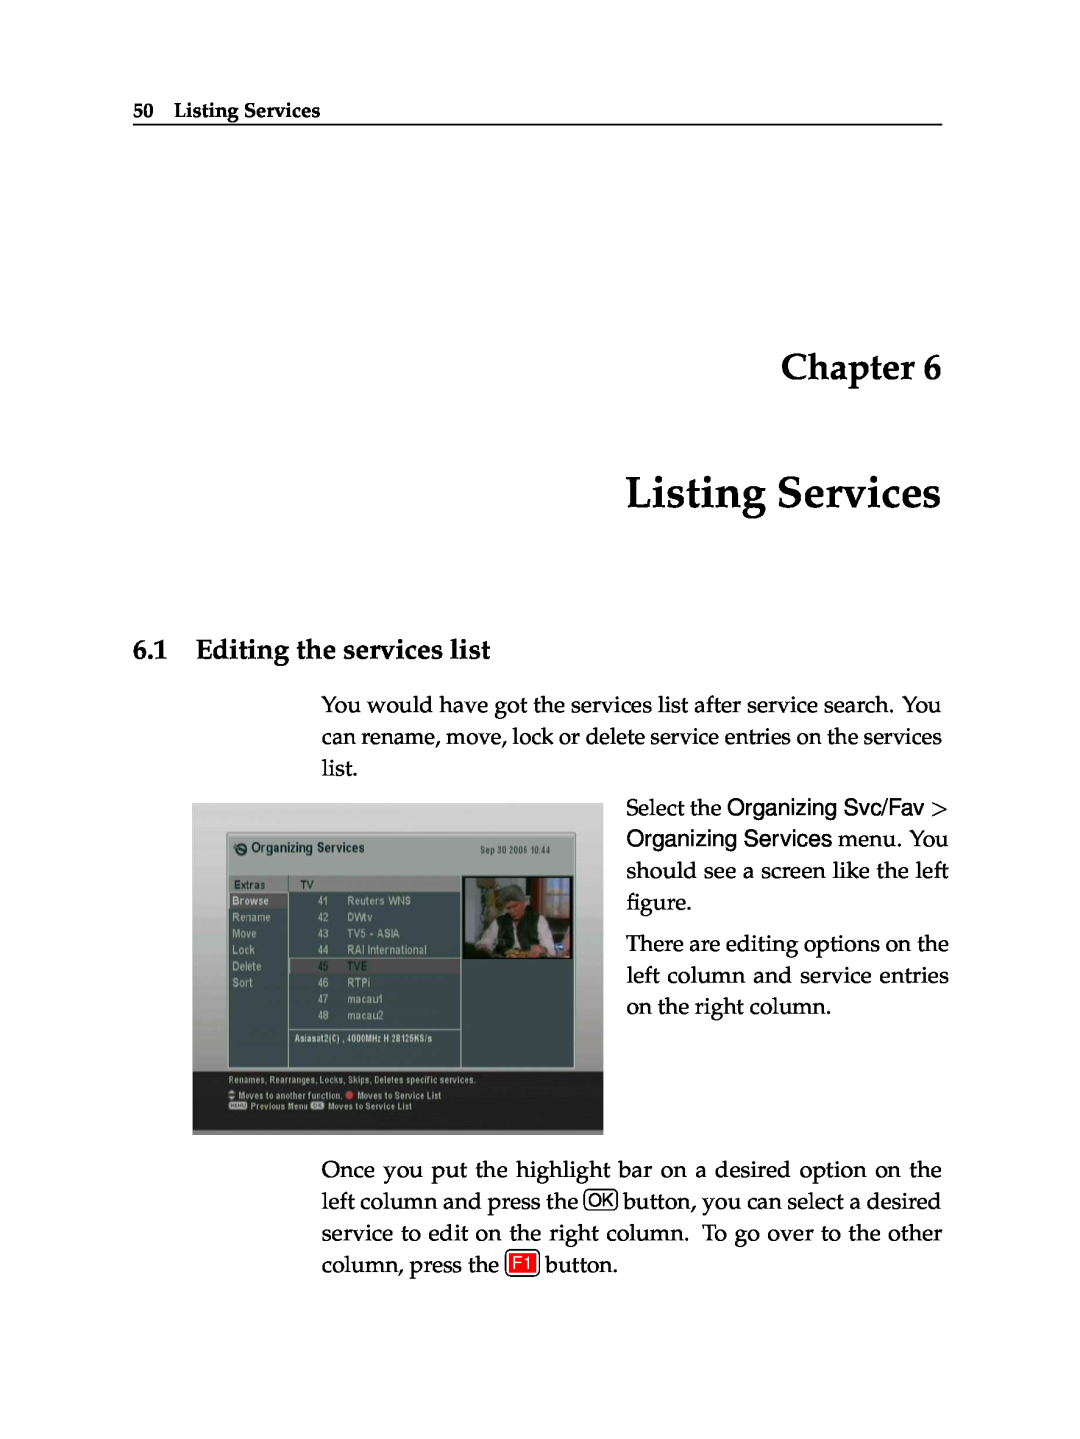 Topfield TF 6000 PVR ES manual Listing Services, Editing the services list, Chapter 